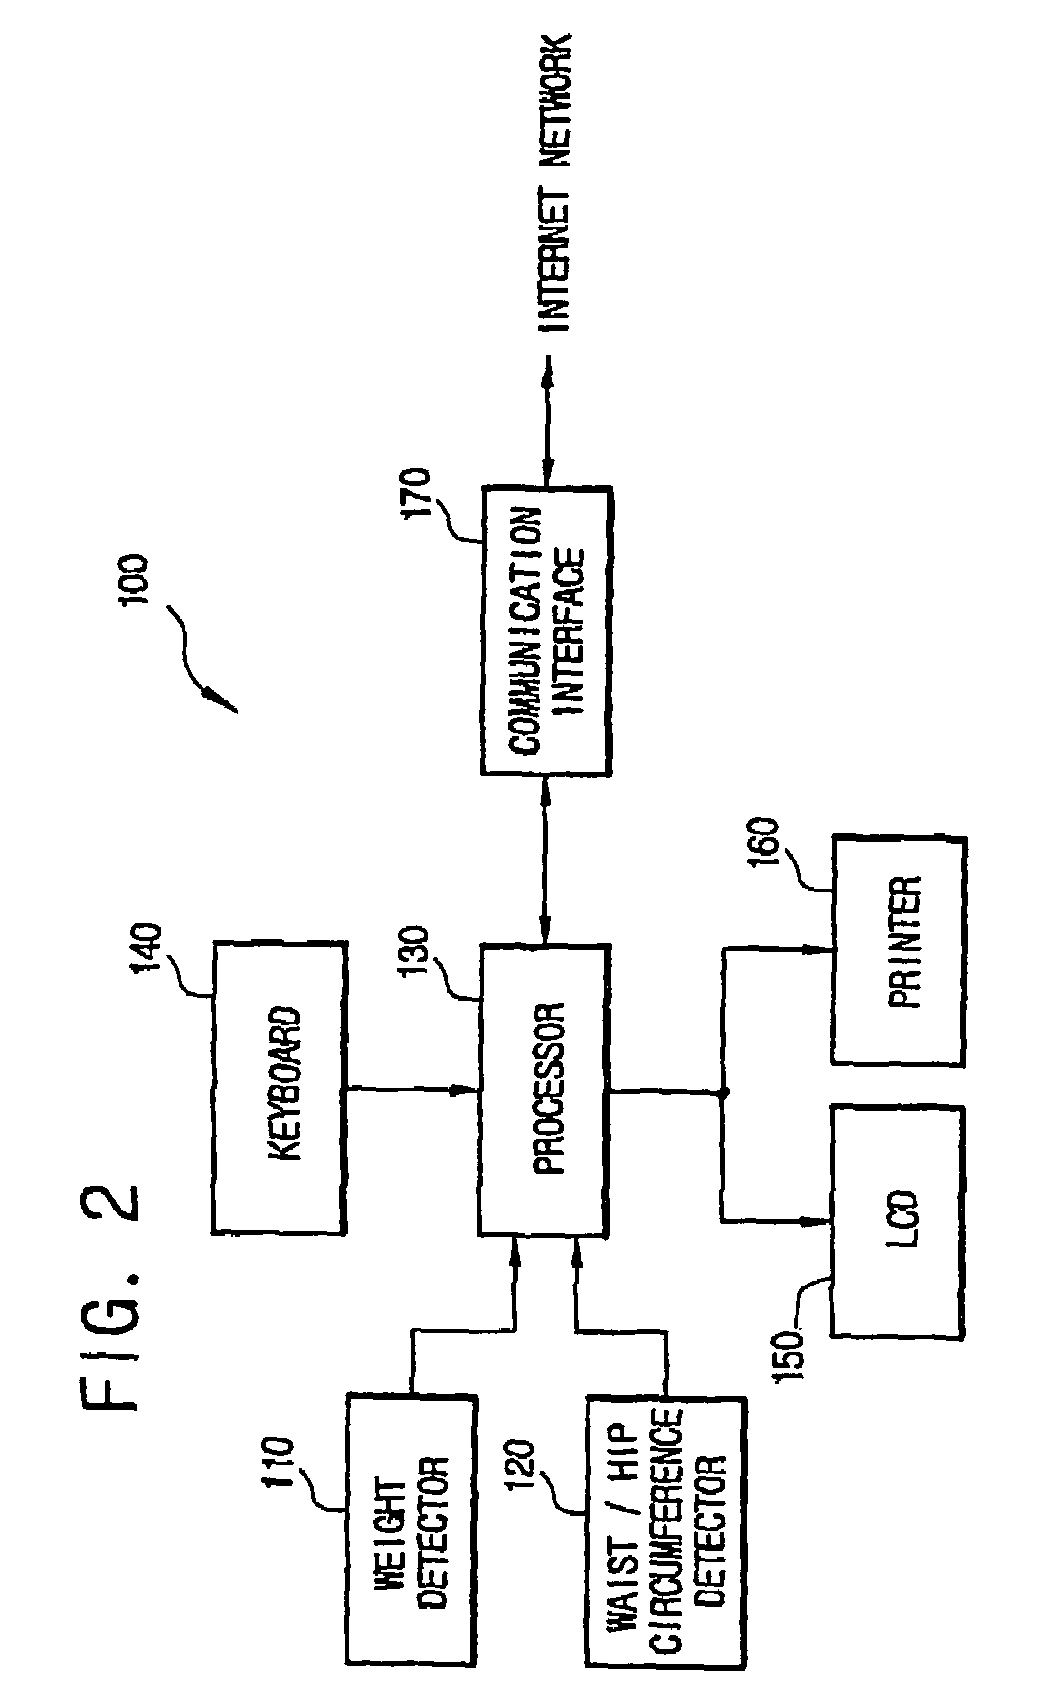 System having digital weighing scale device and method for outputting diet information transmitted through internet network